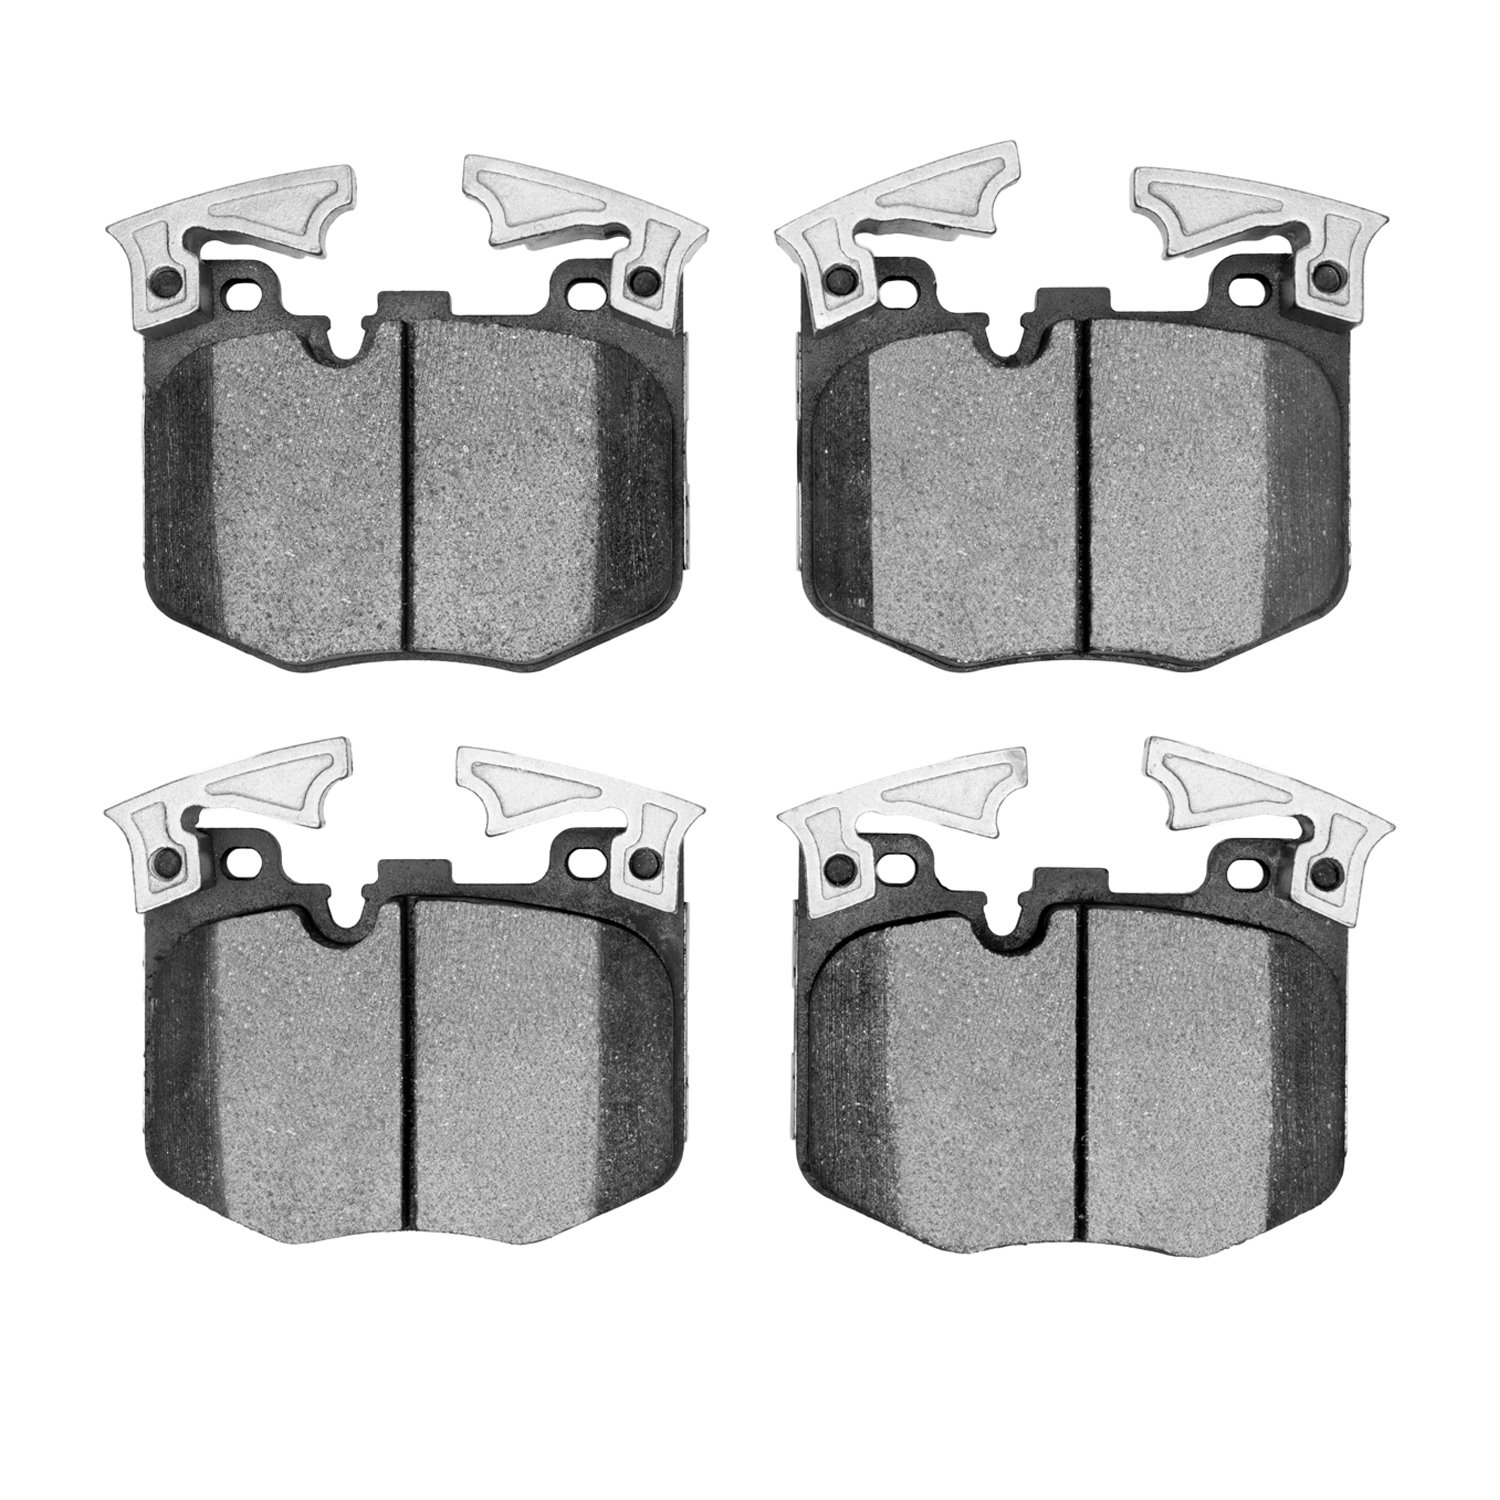 Semi-Metallic Brake Pads, Fits Select Fits Multiple Makes/Models, Position: Front